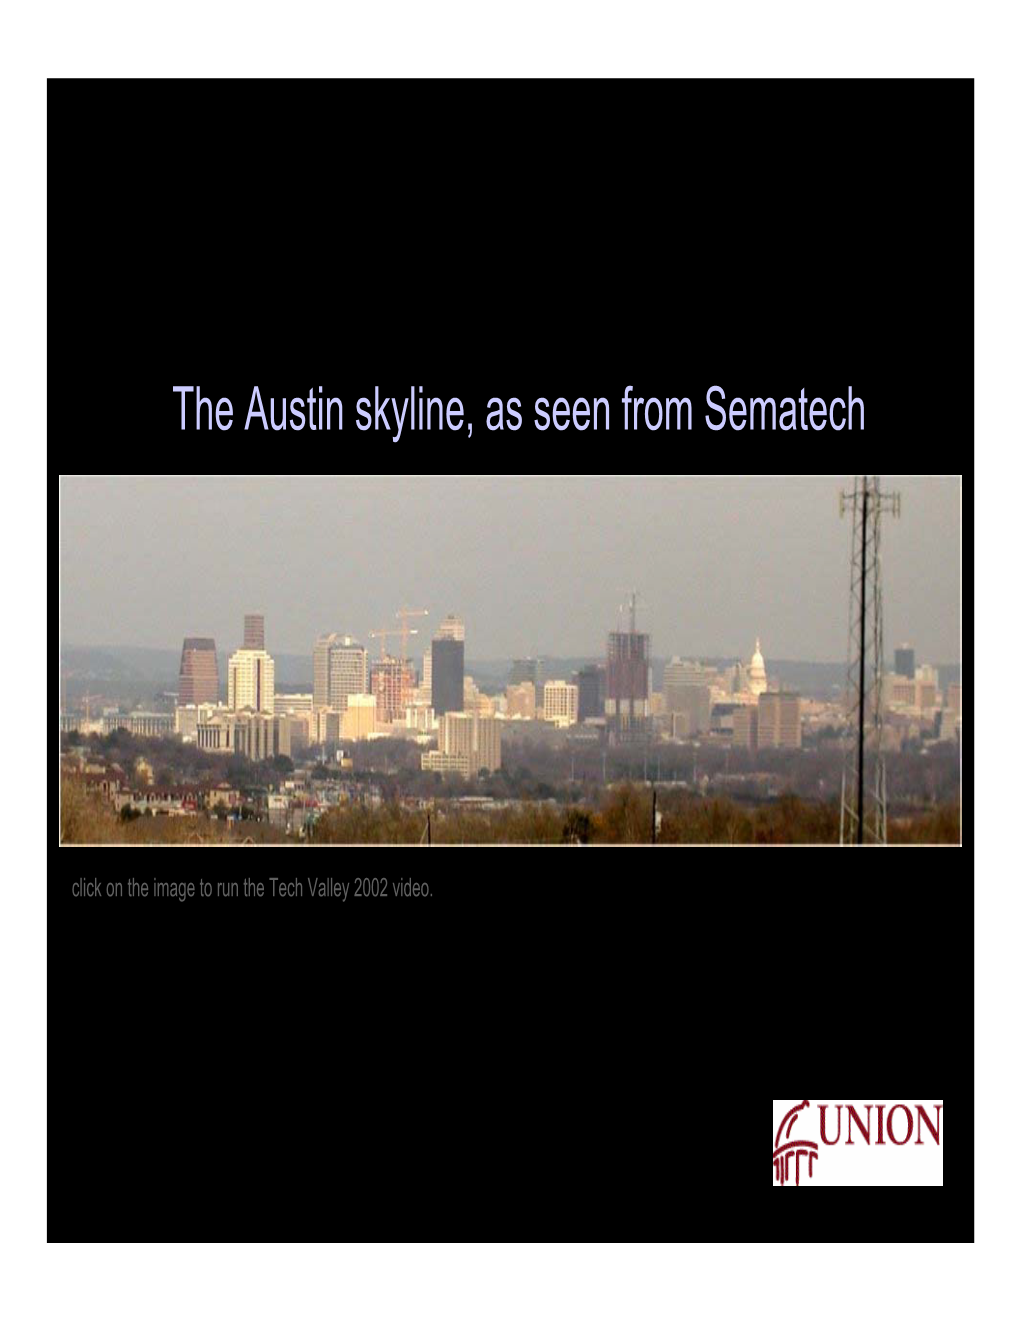 The Austin Skyline, As Seen from Sematech